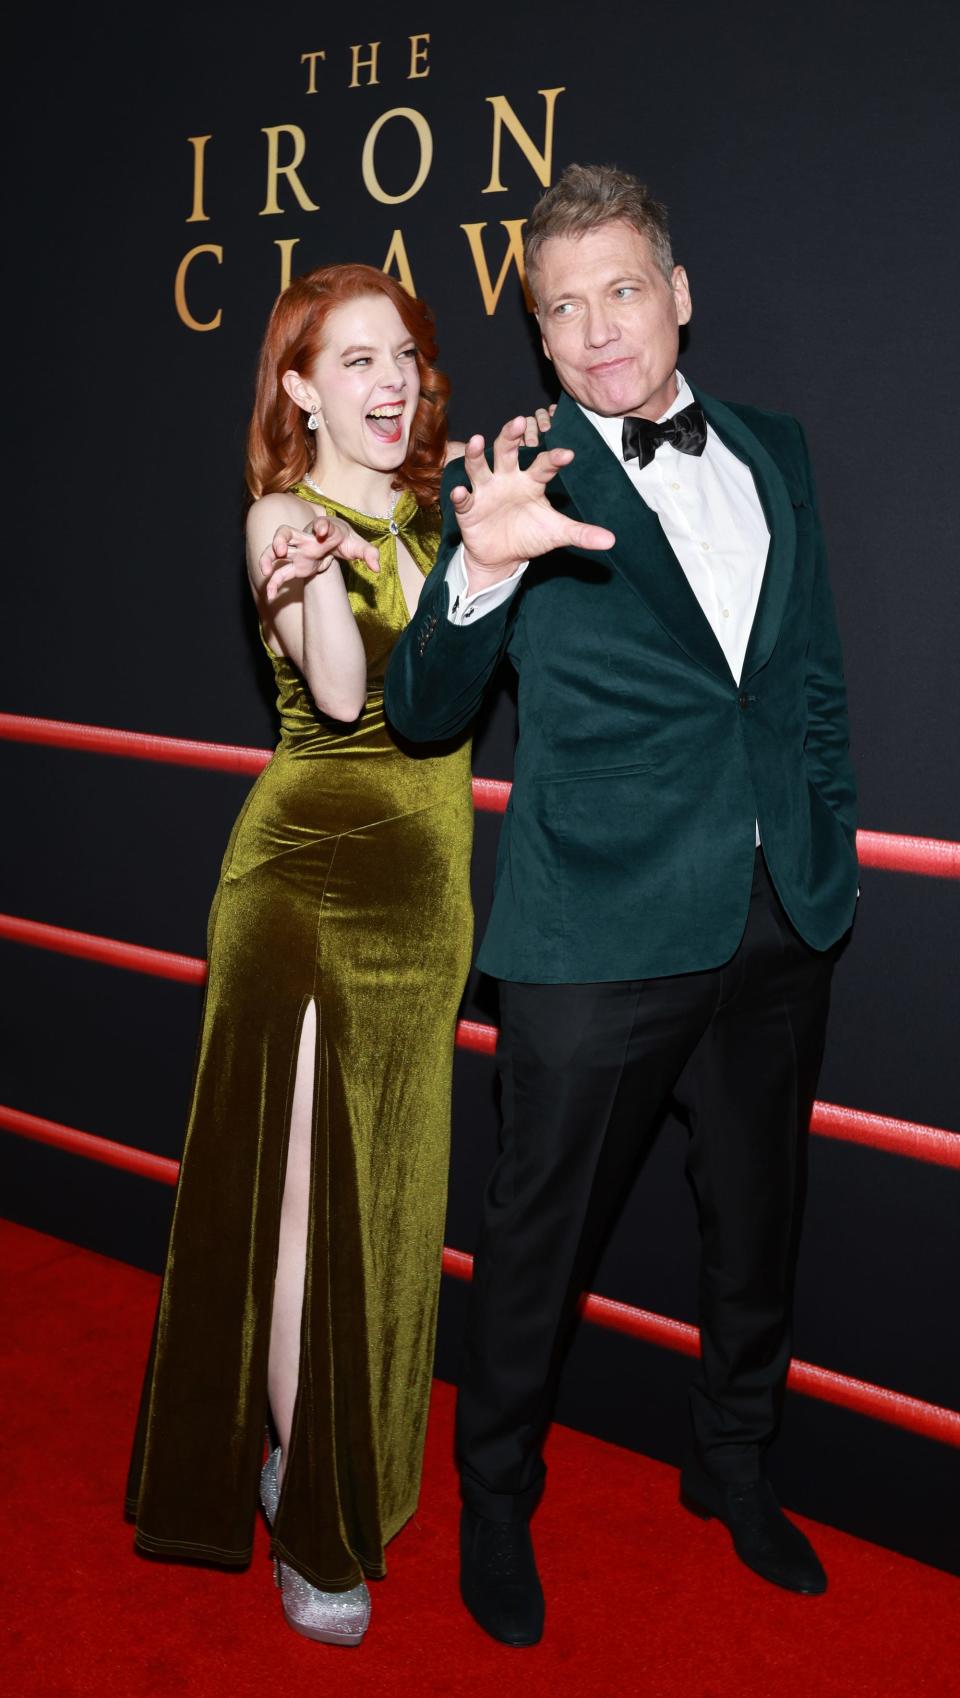 Desiree Bressend in green dress and Holt McCallany in turqouise suit at "The Iron Claw" premiere